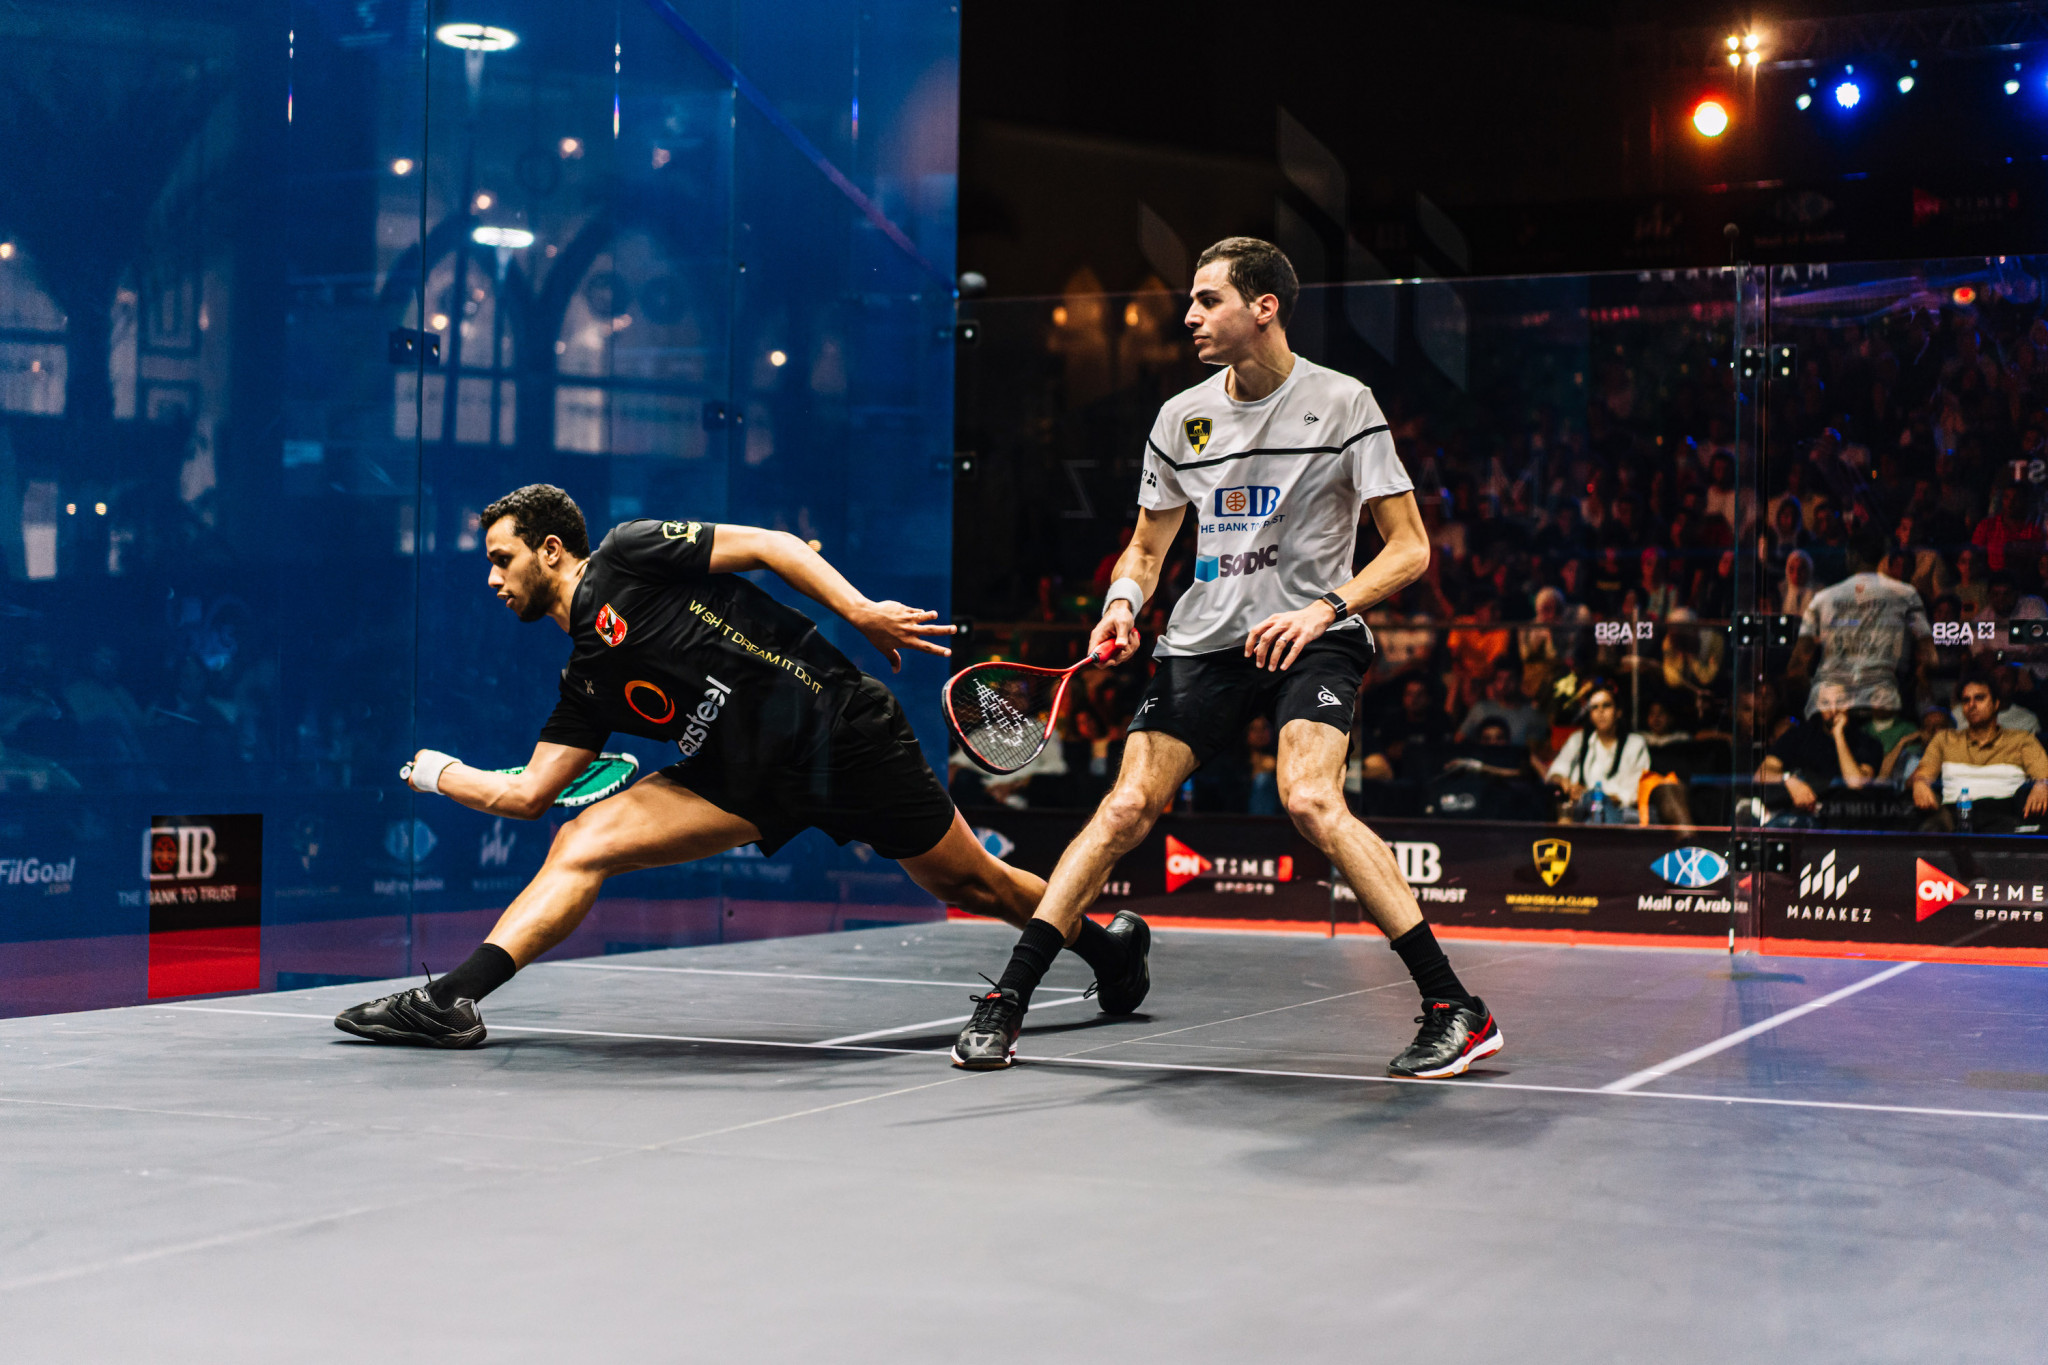 World number three Mostafa Asal, left, did not drop a game in his run to men's singles glory ©PSA